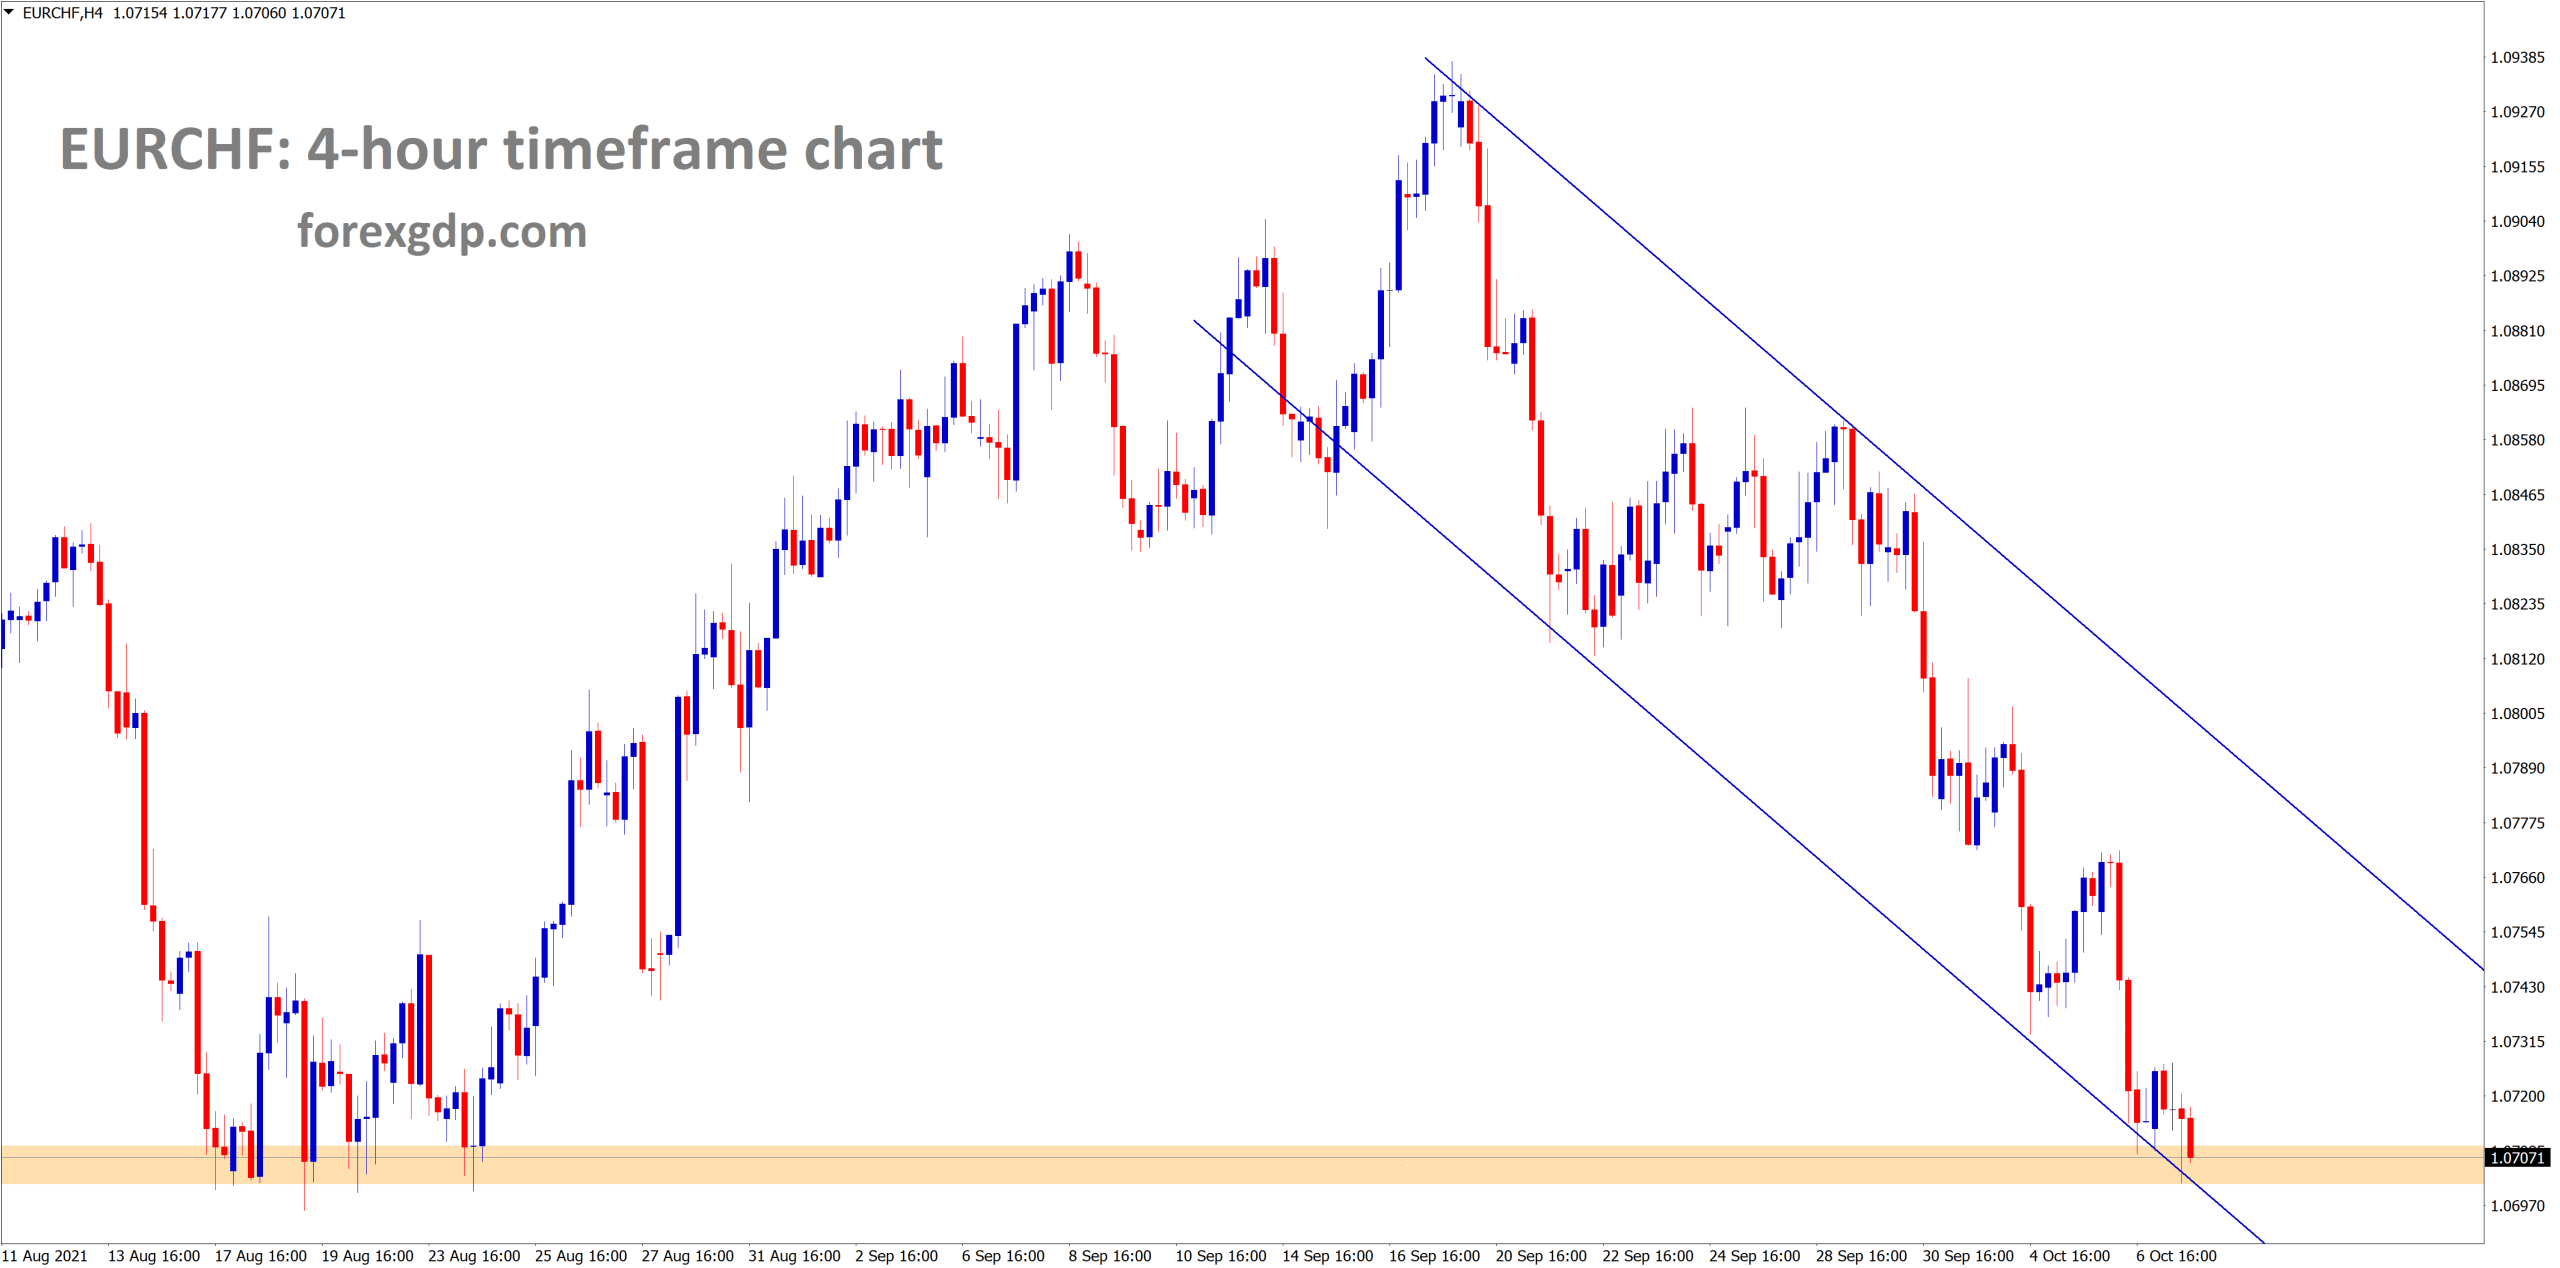 EURCHF is standing exactly at the support area and the lower low level of descending channel